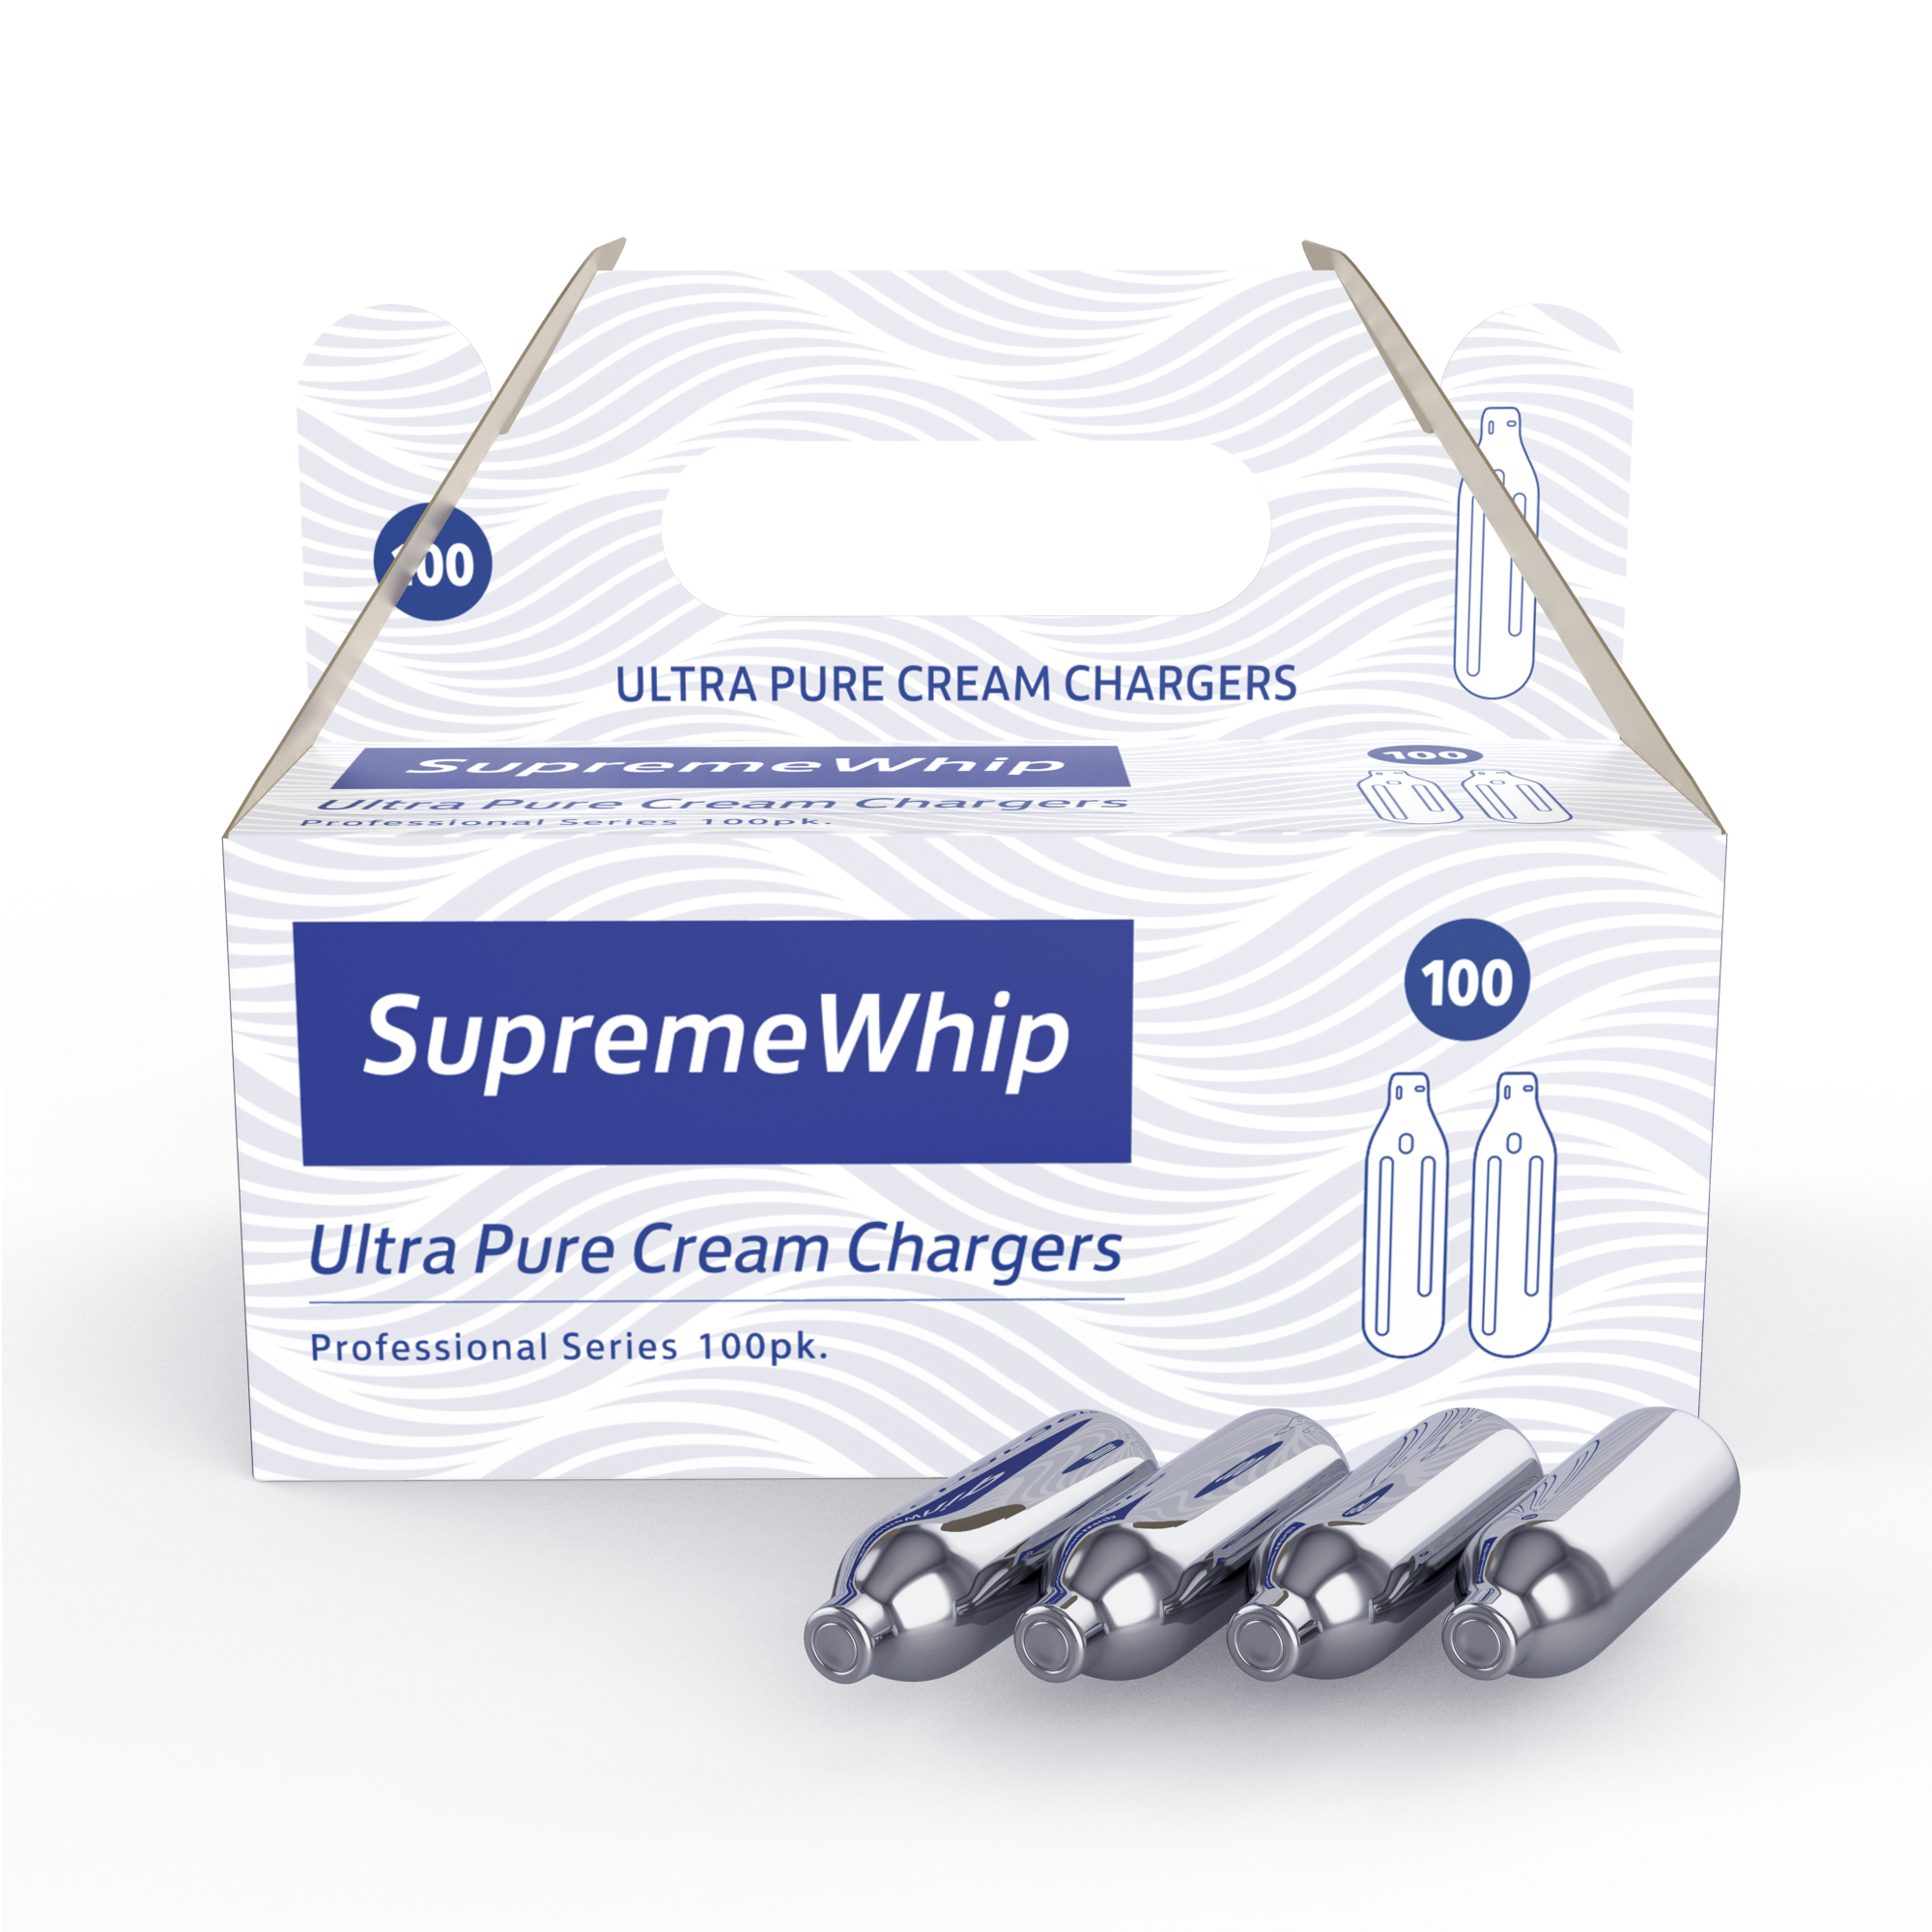 SupremeWhip Cream Chargers 8.2g in 100Pks